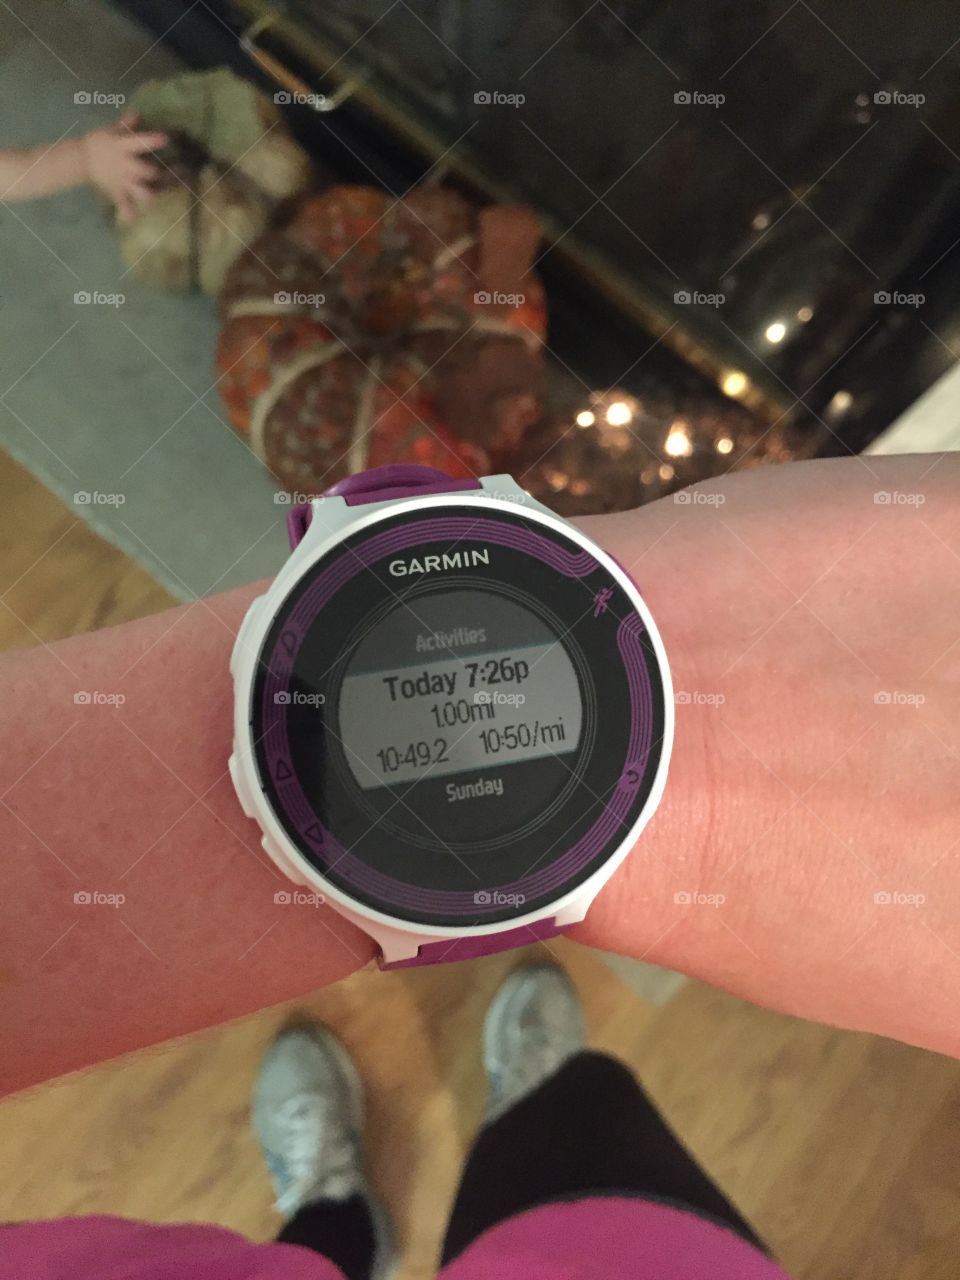 Baby photobombing my Garmin pic after a fall evening run